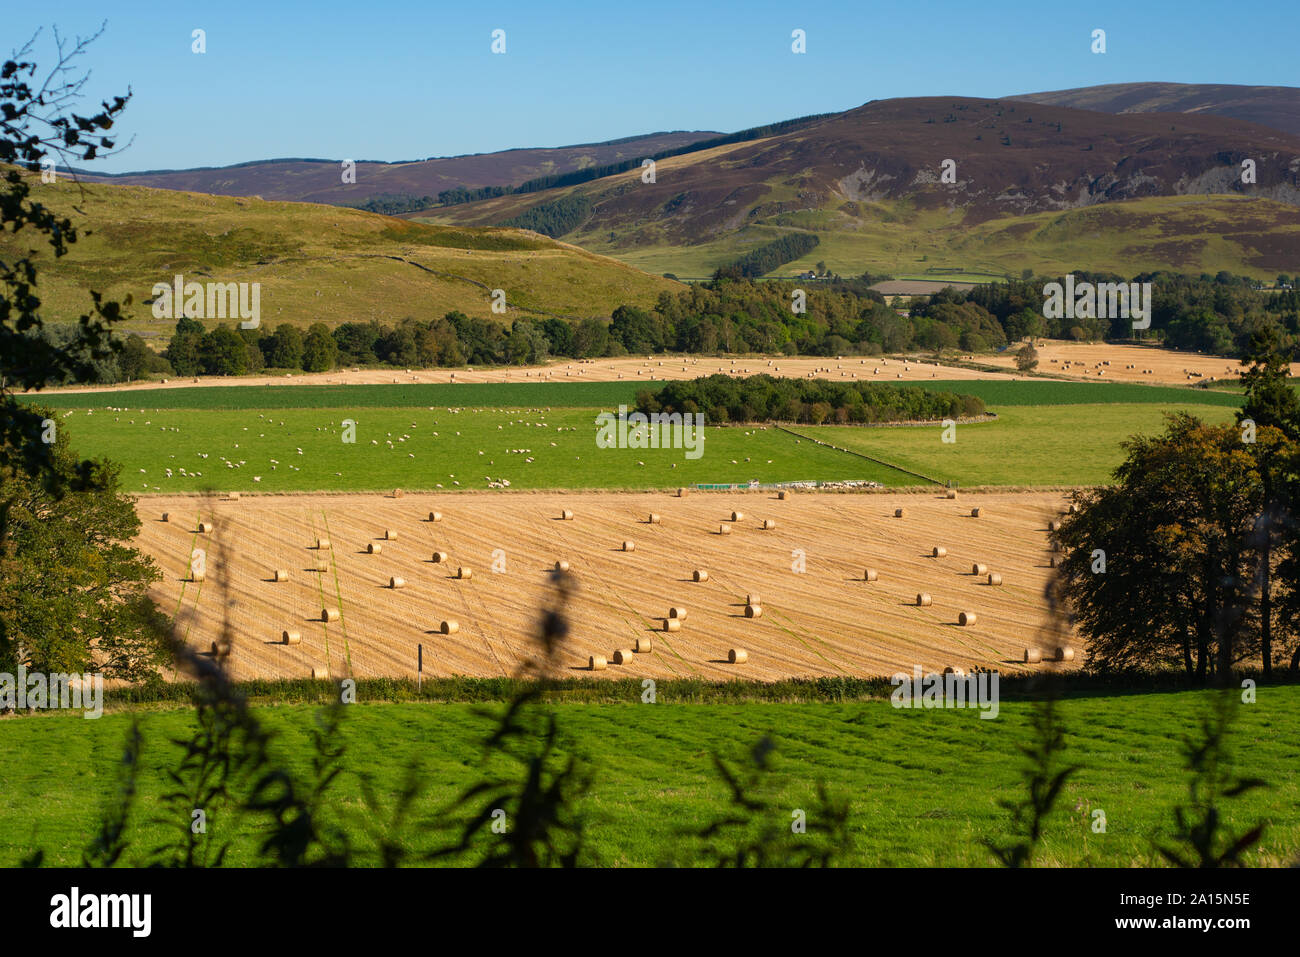 View Over Sheep Hay Bales and Crops on a Farm in Scotland With Hills in the Background Stock Photo